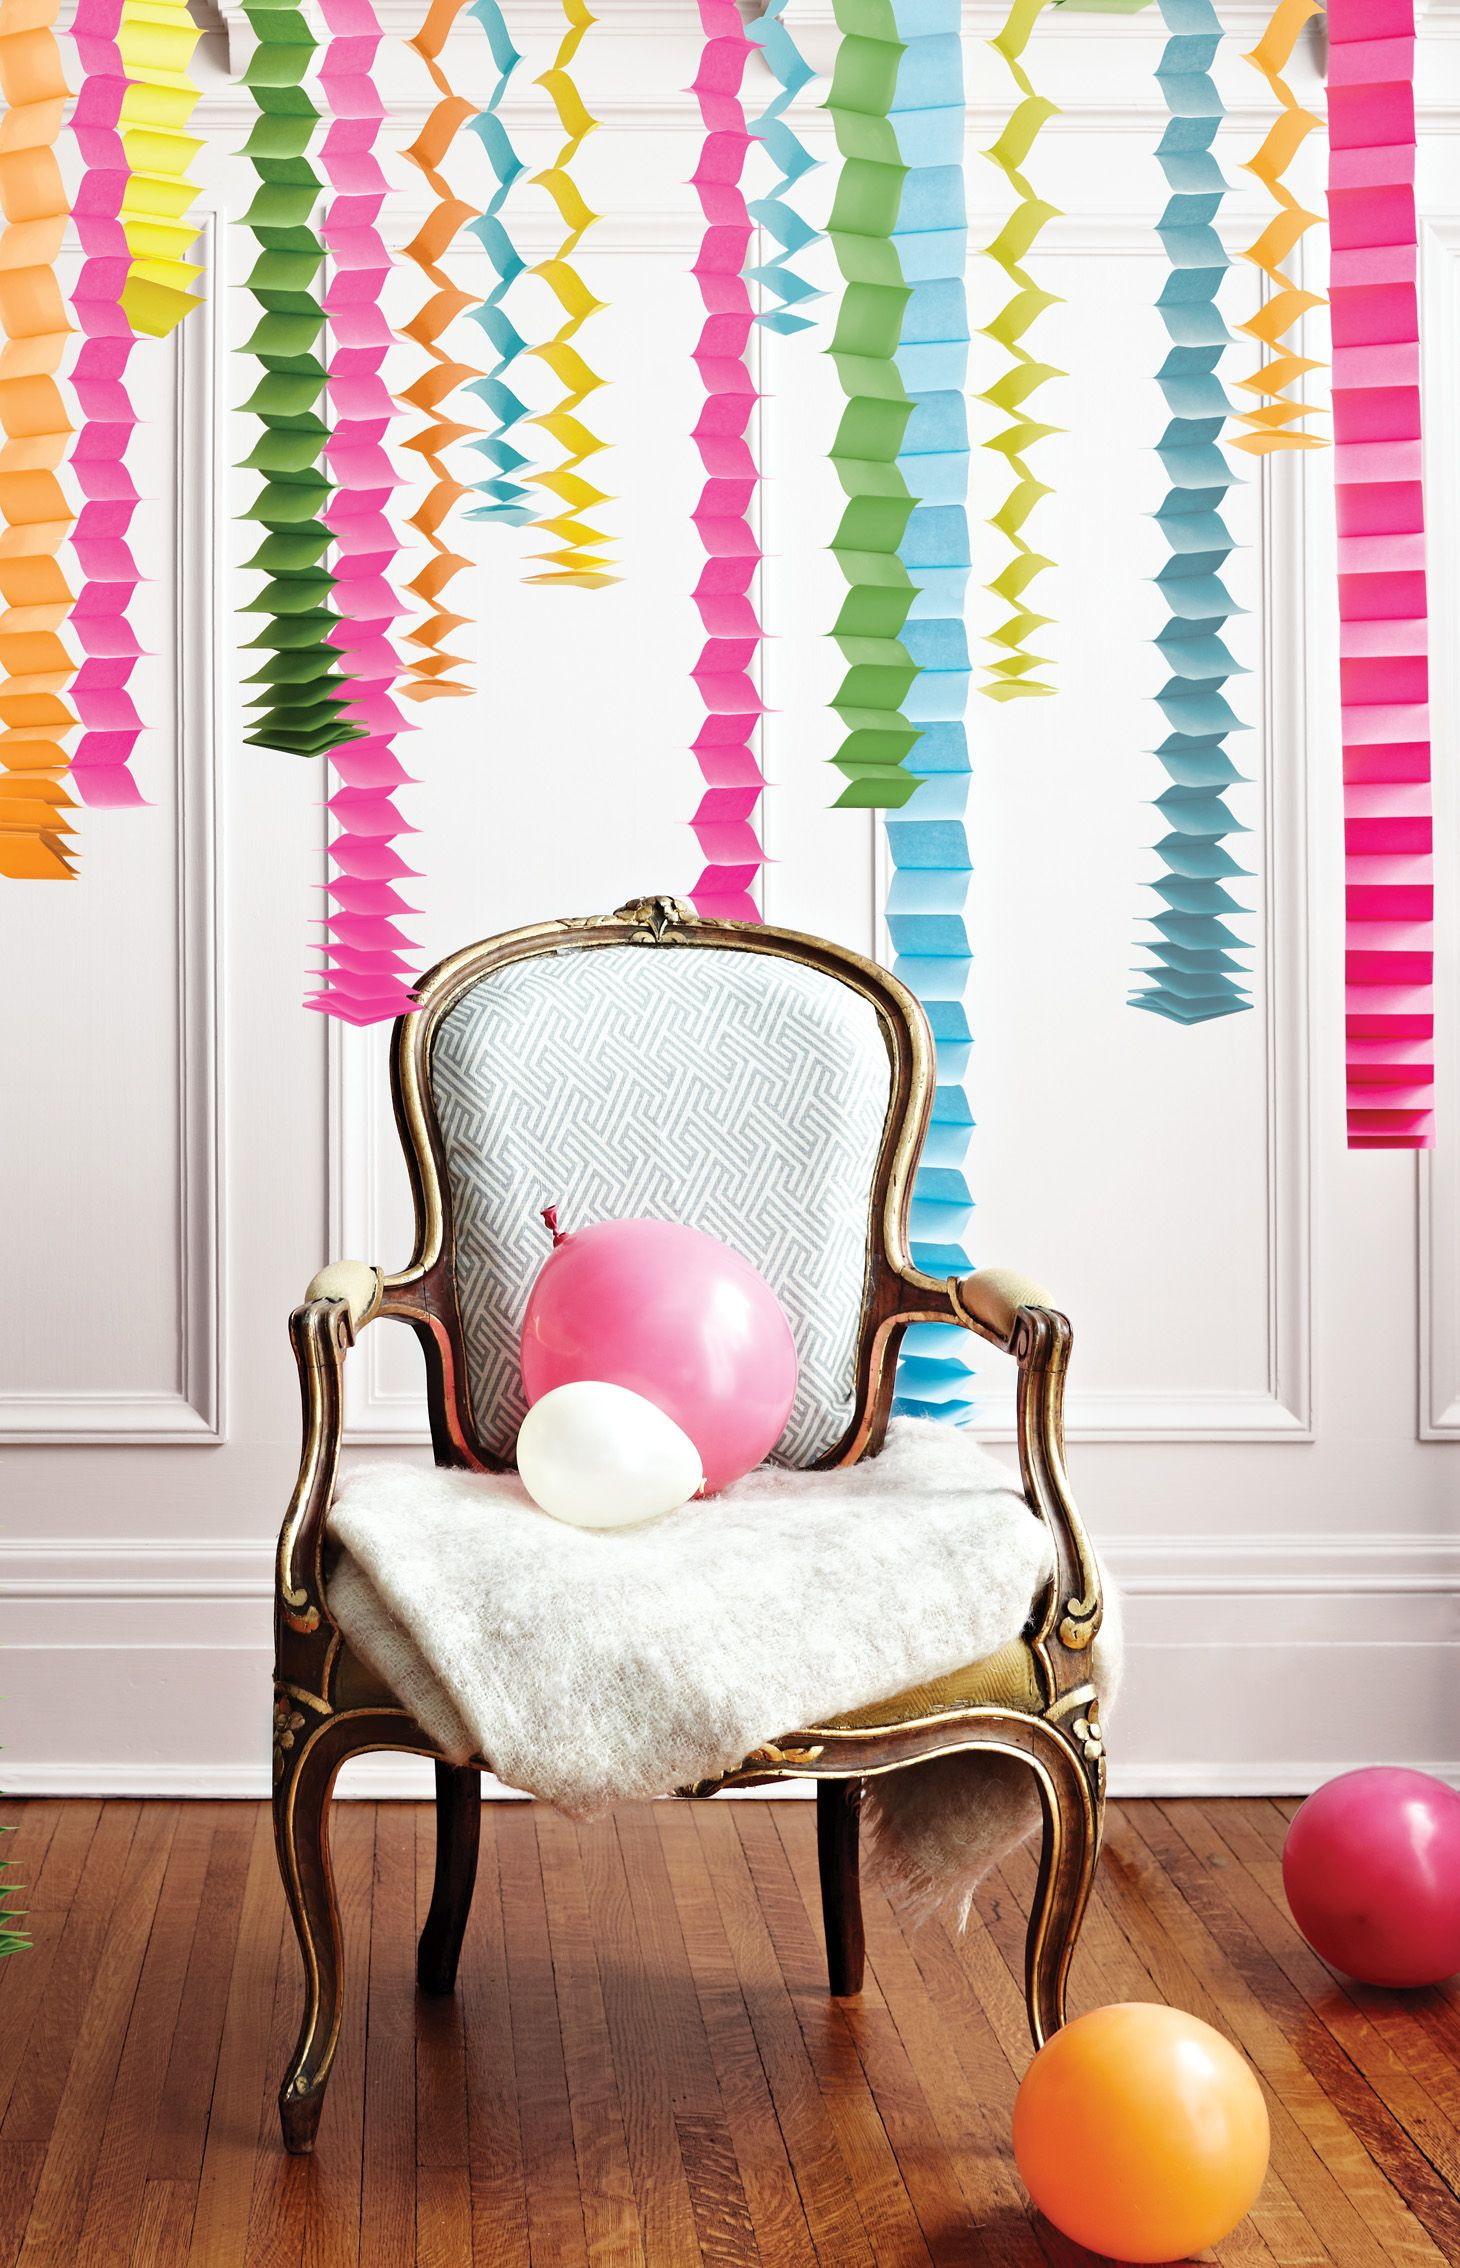 How To Decorate Birthday Party
 Creating A Housewarming Party With DIY Decorations